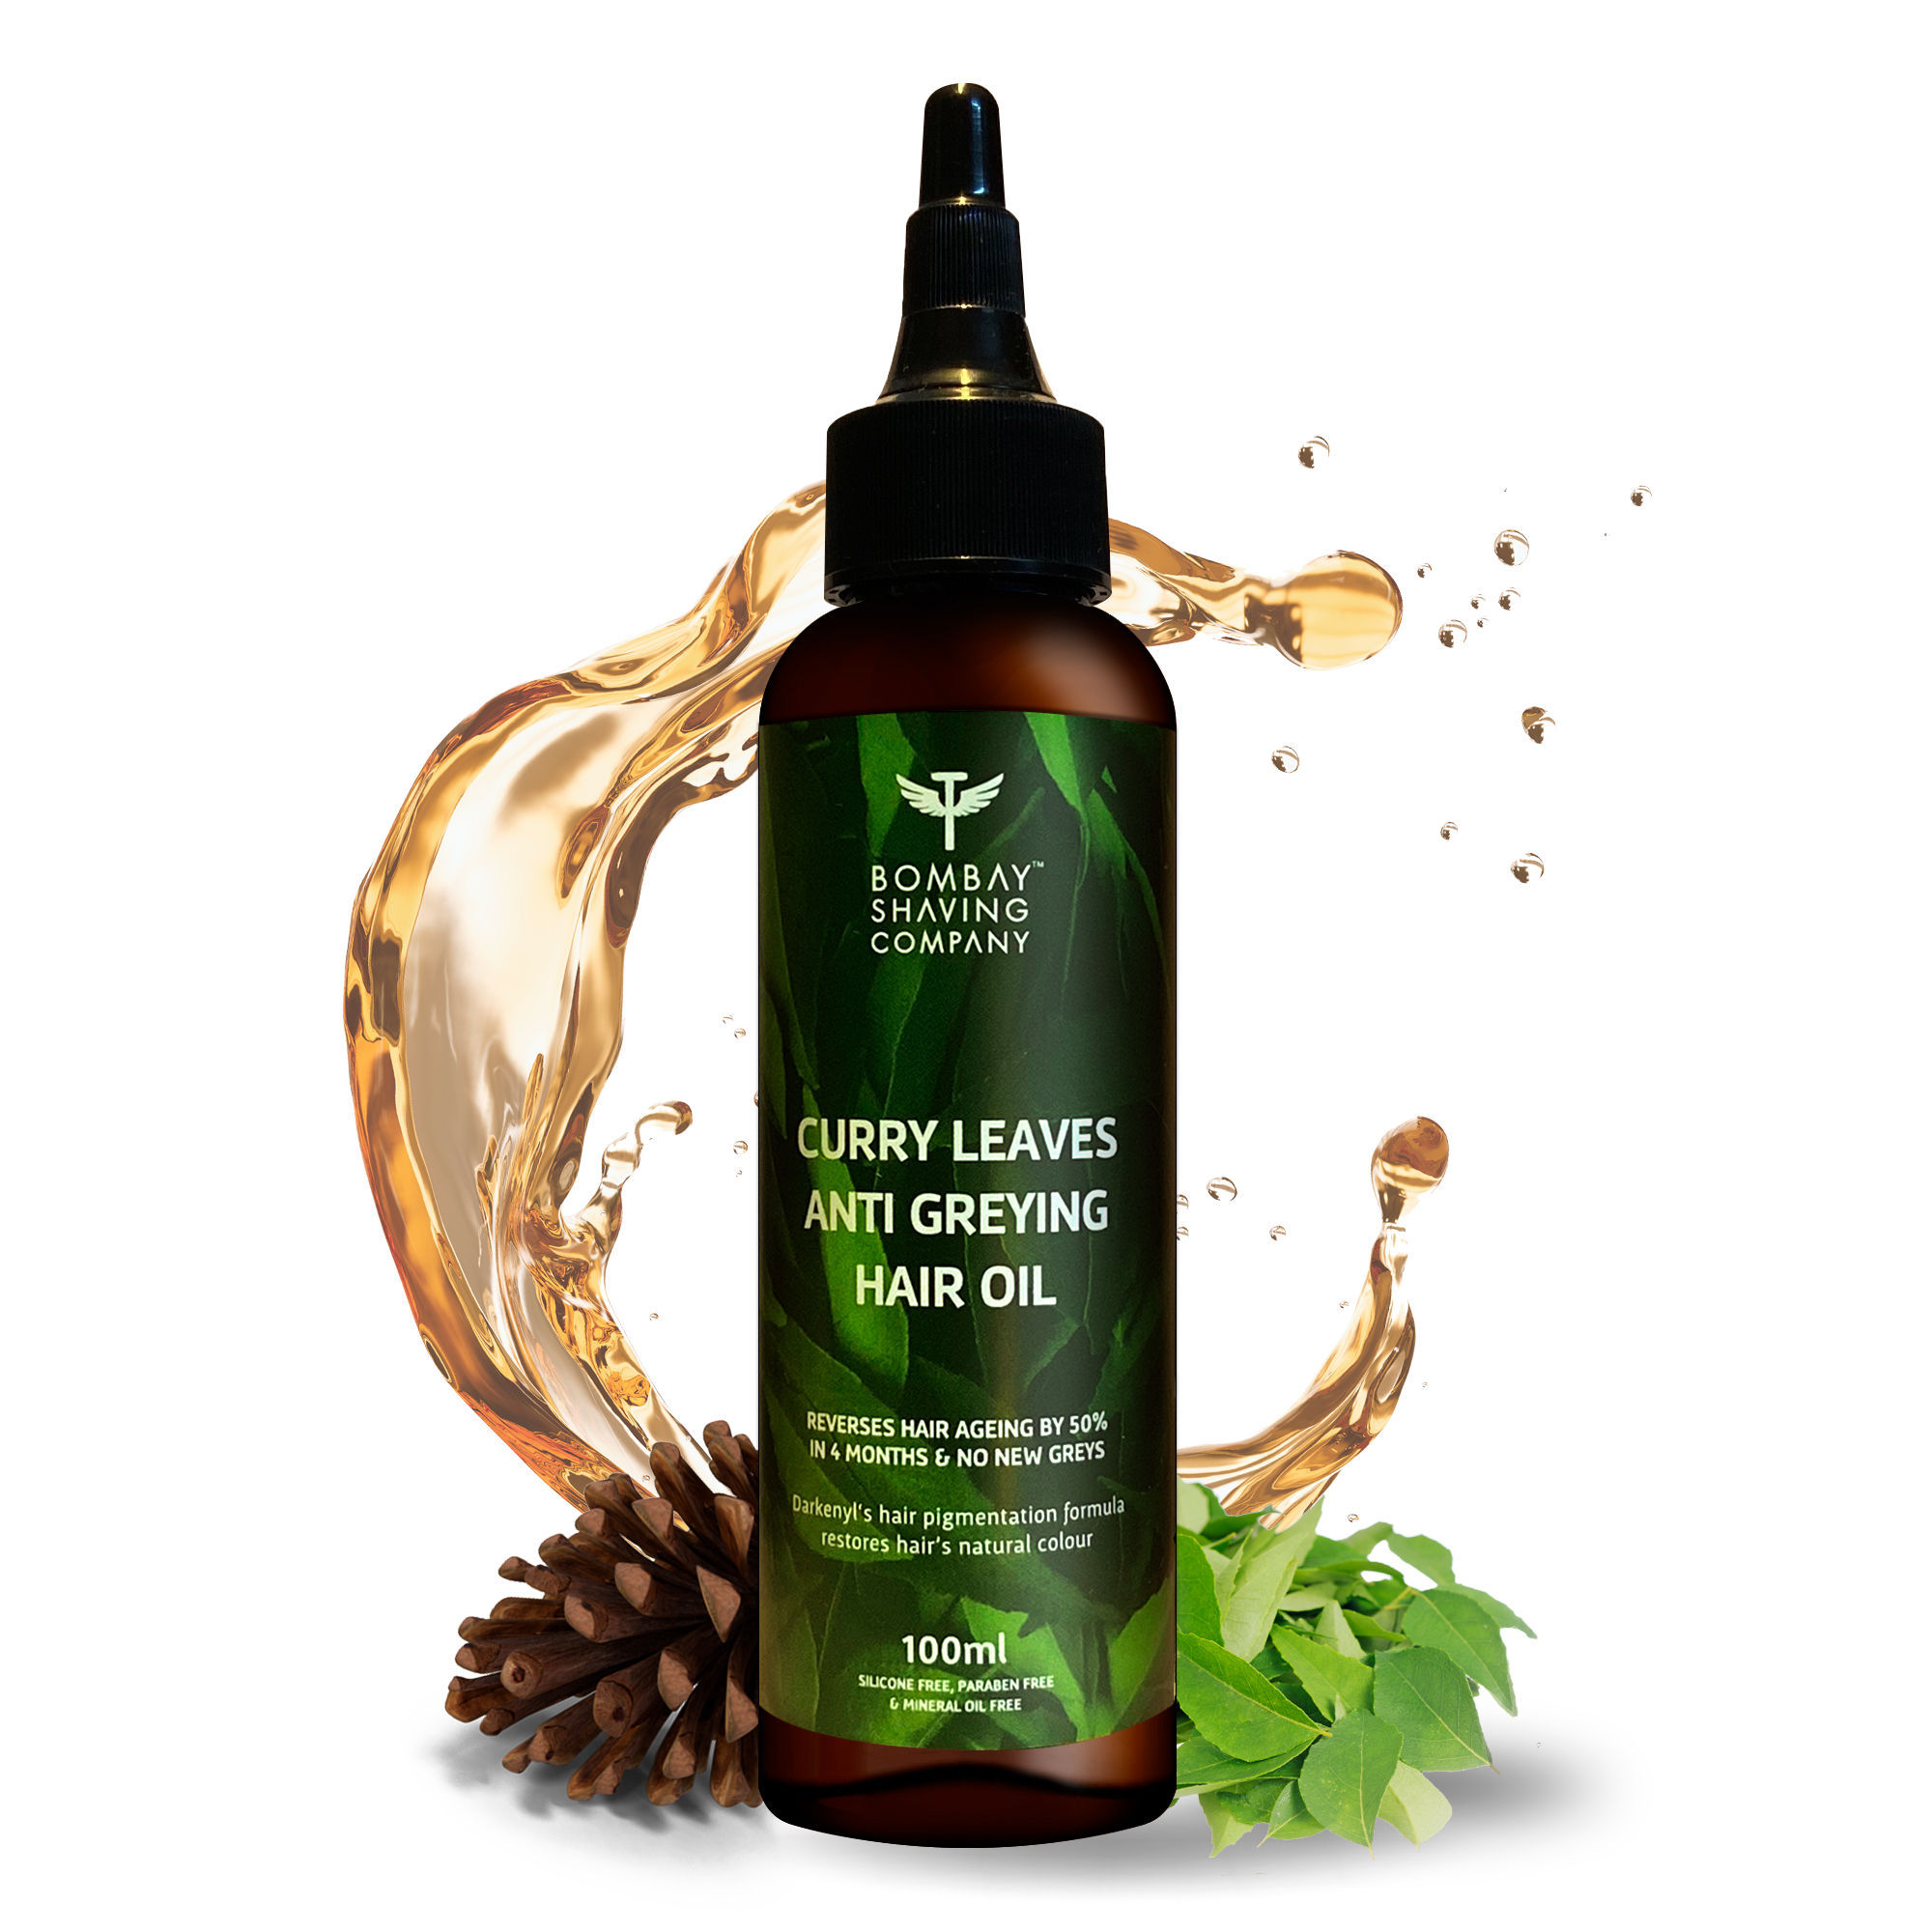 Bombay Shaving Company Anti Greying Hair Oil With Curry Leaves and Darkenyl